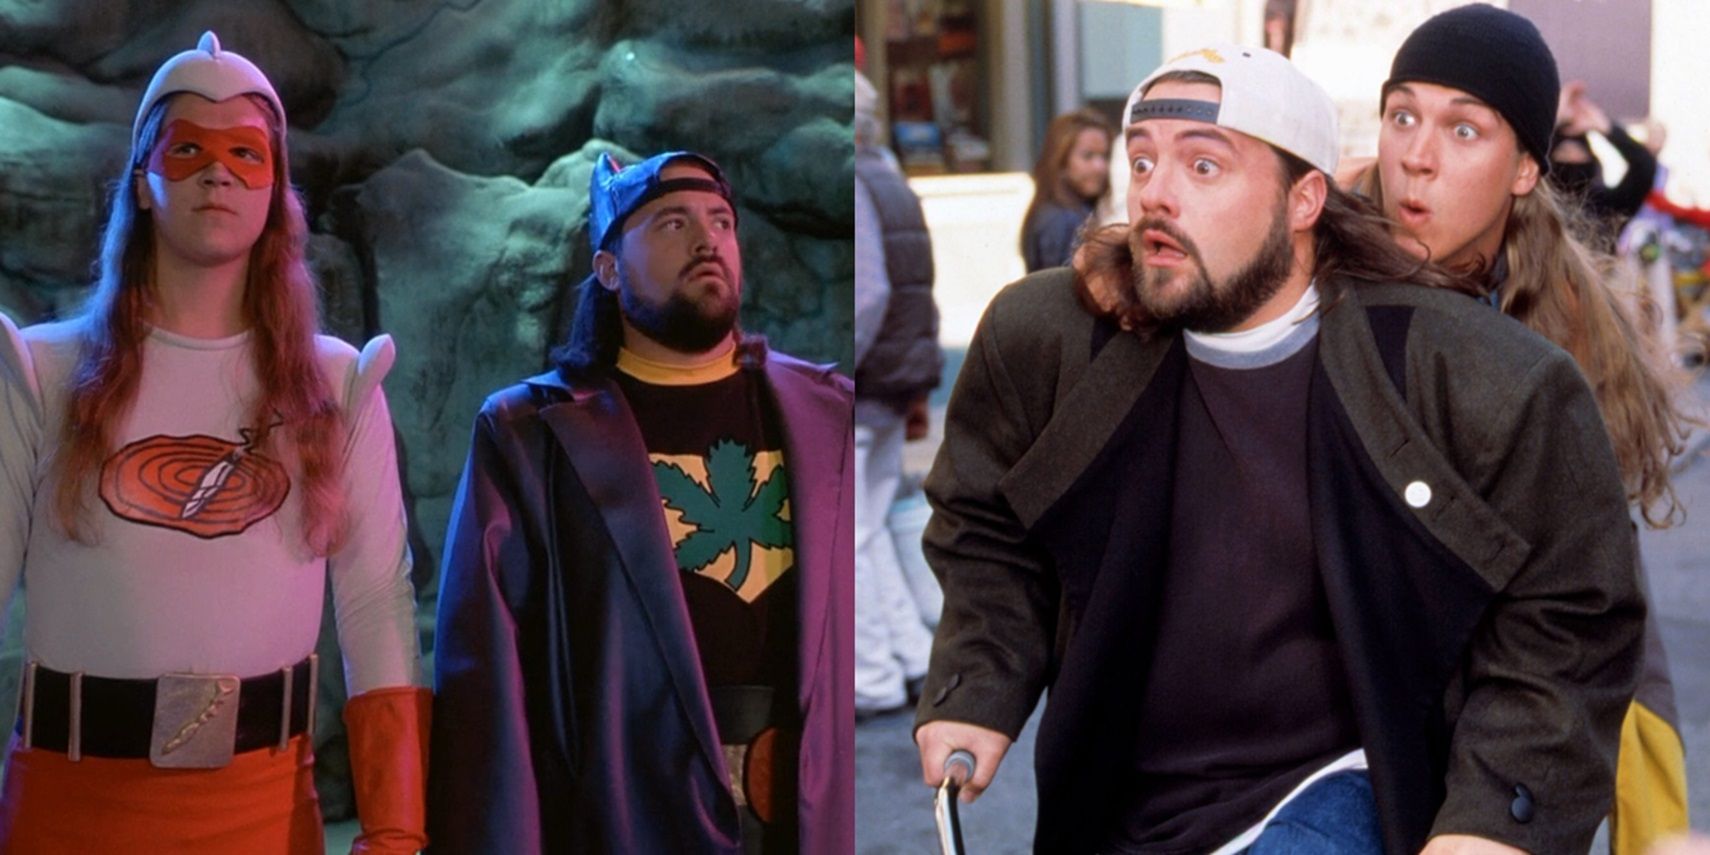 Jay and Silent Bob dressed as Bluntman and Chronic in Jay and Silent Bob Strike Back